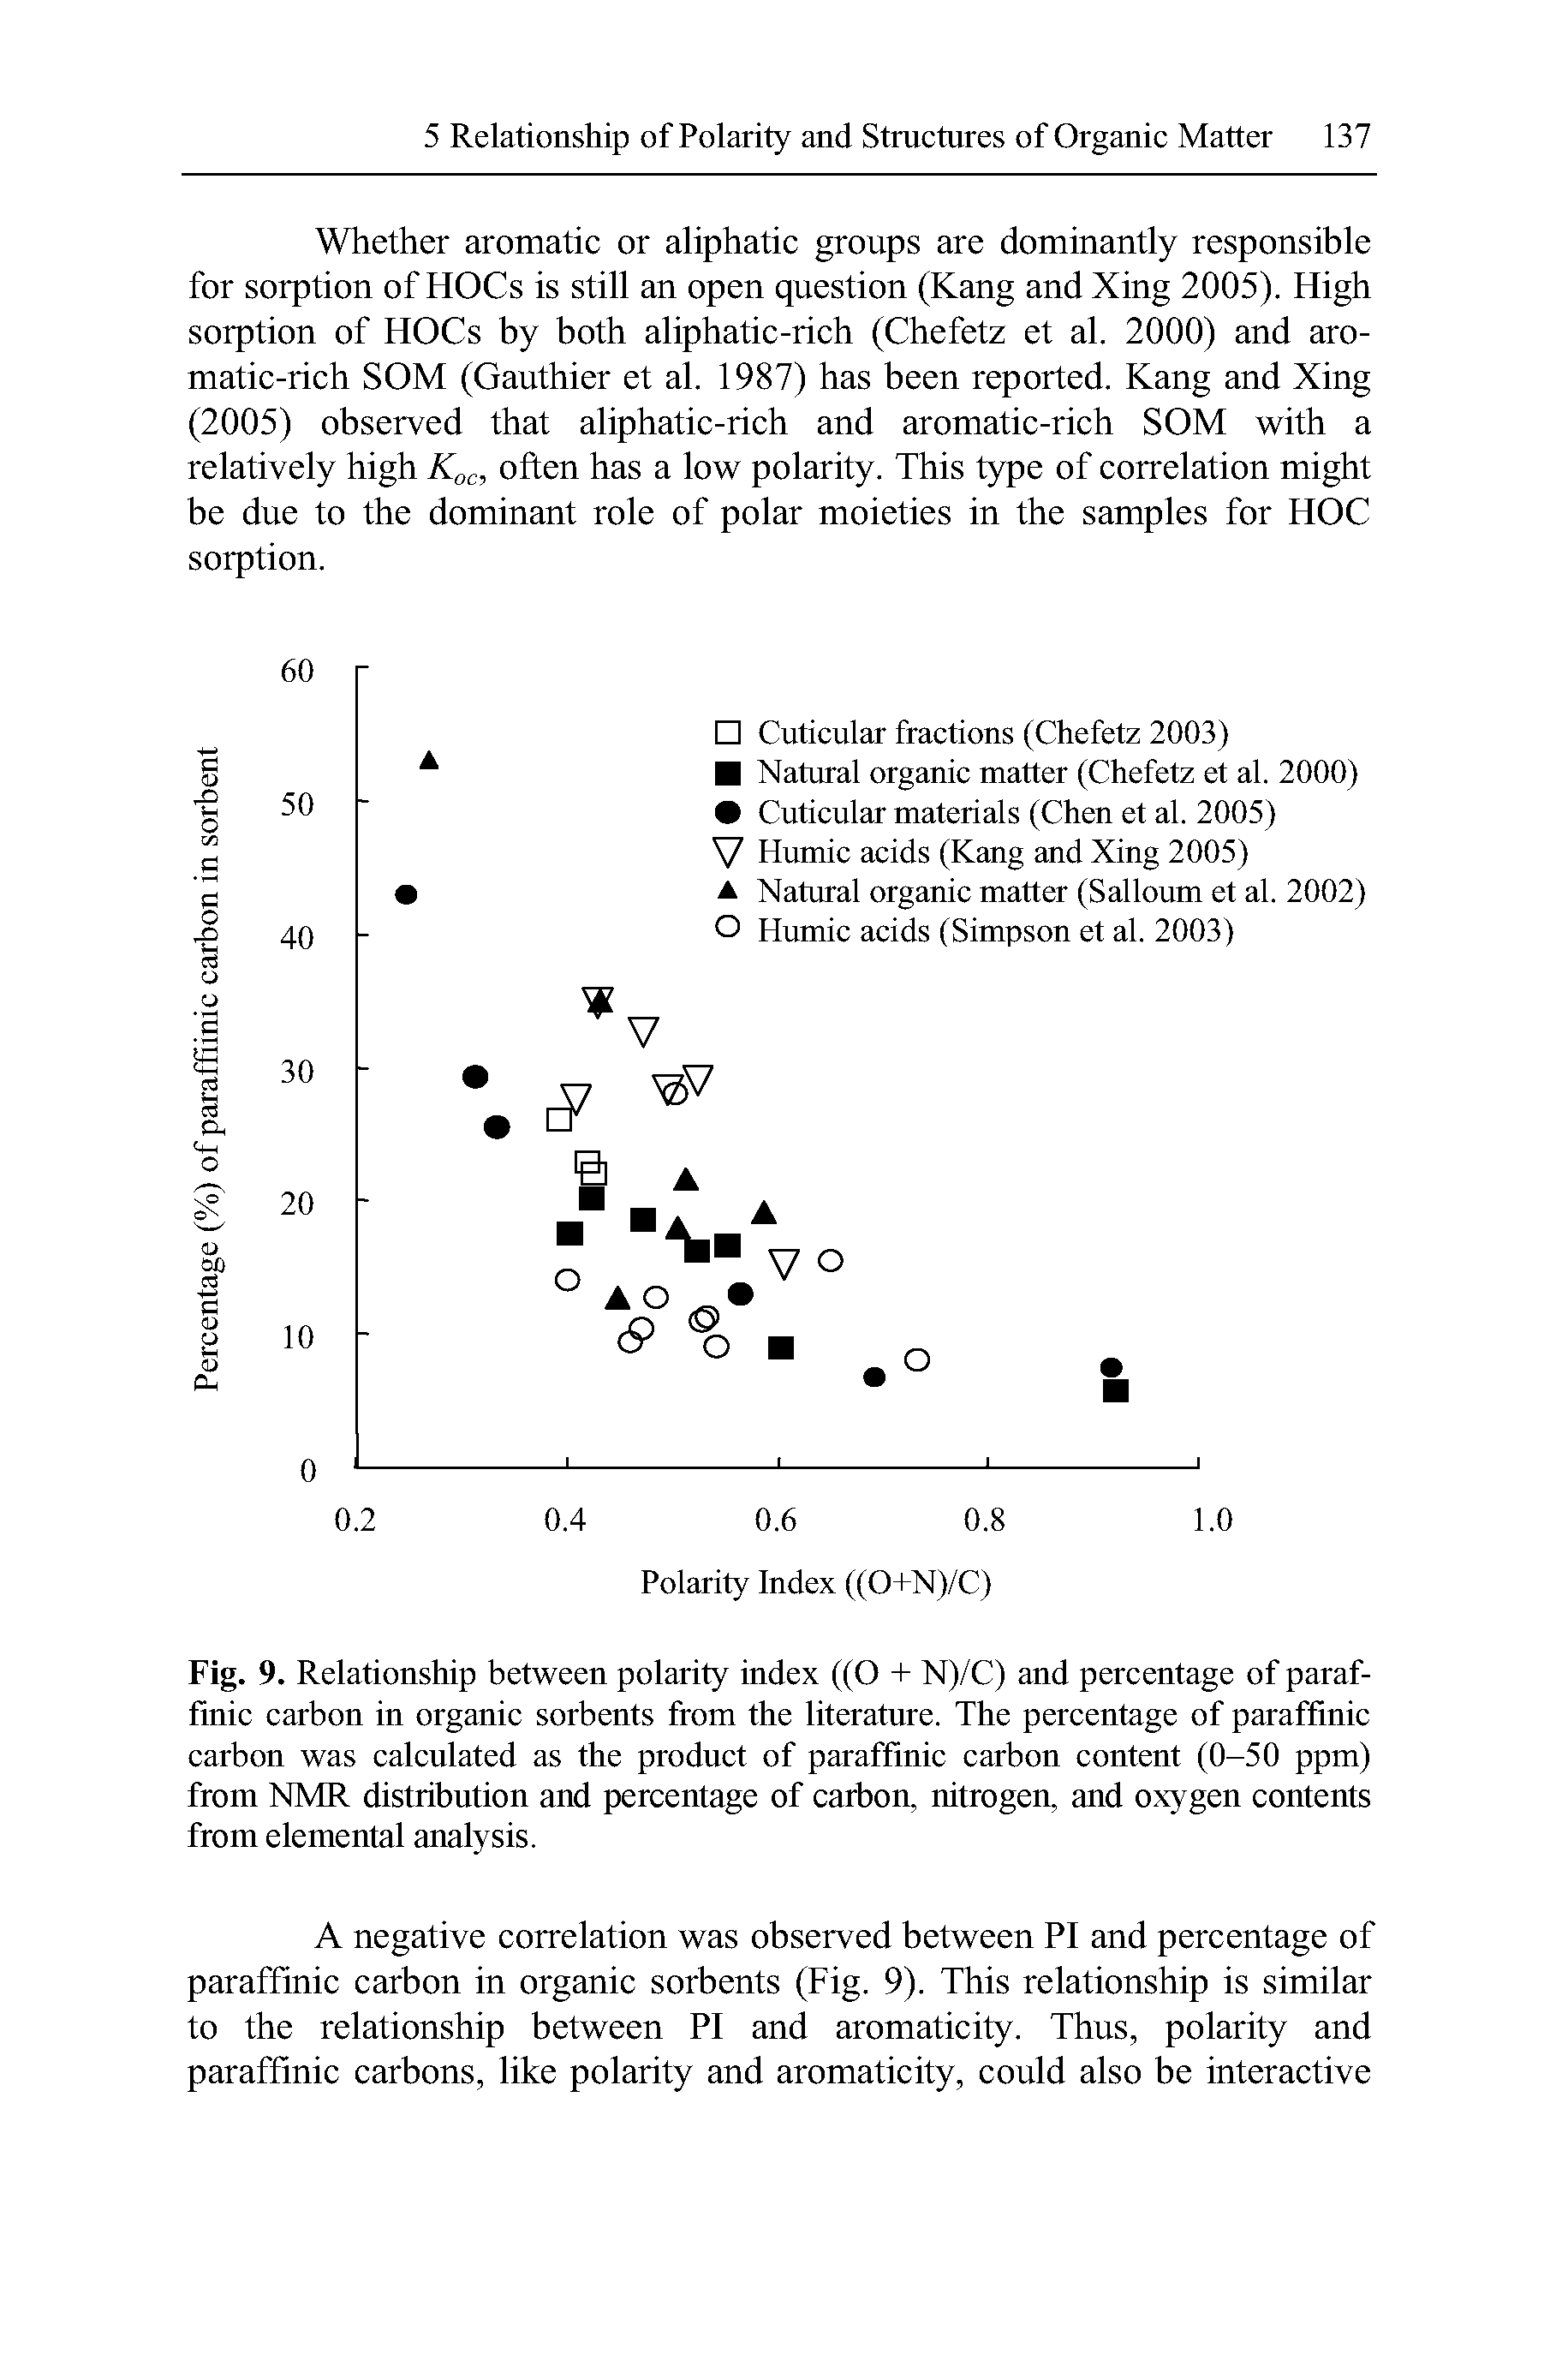 Fig. 9. Relationship between polarity index ((O + N)/C) and percentage of paraffinic carbon in organic sorbents from the literature. The percentage of paraffinic carbon was calculated as the product of paraffinic carbon content (0-50 ppm) from NMR distribution and percentage of carbon, nitrogen, and oxygen contents from elemental analysis.